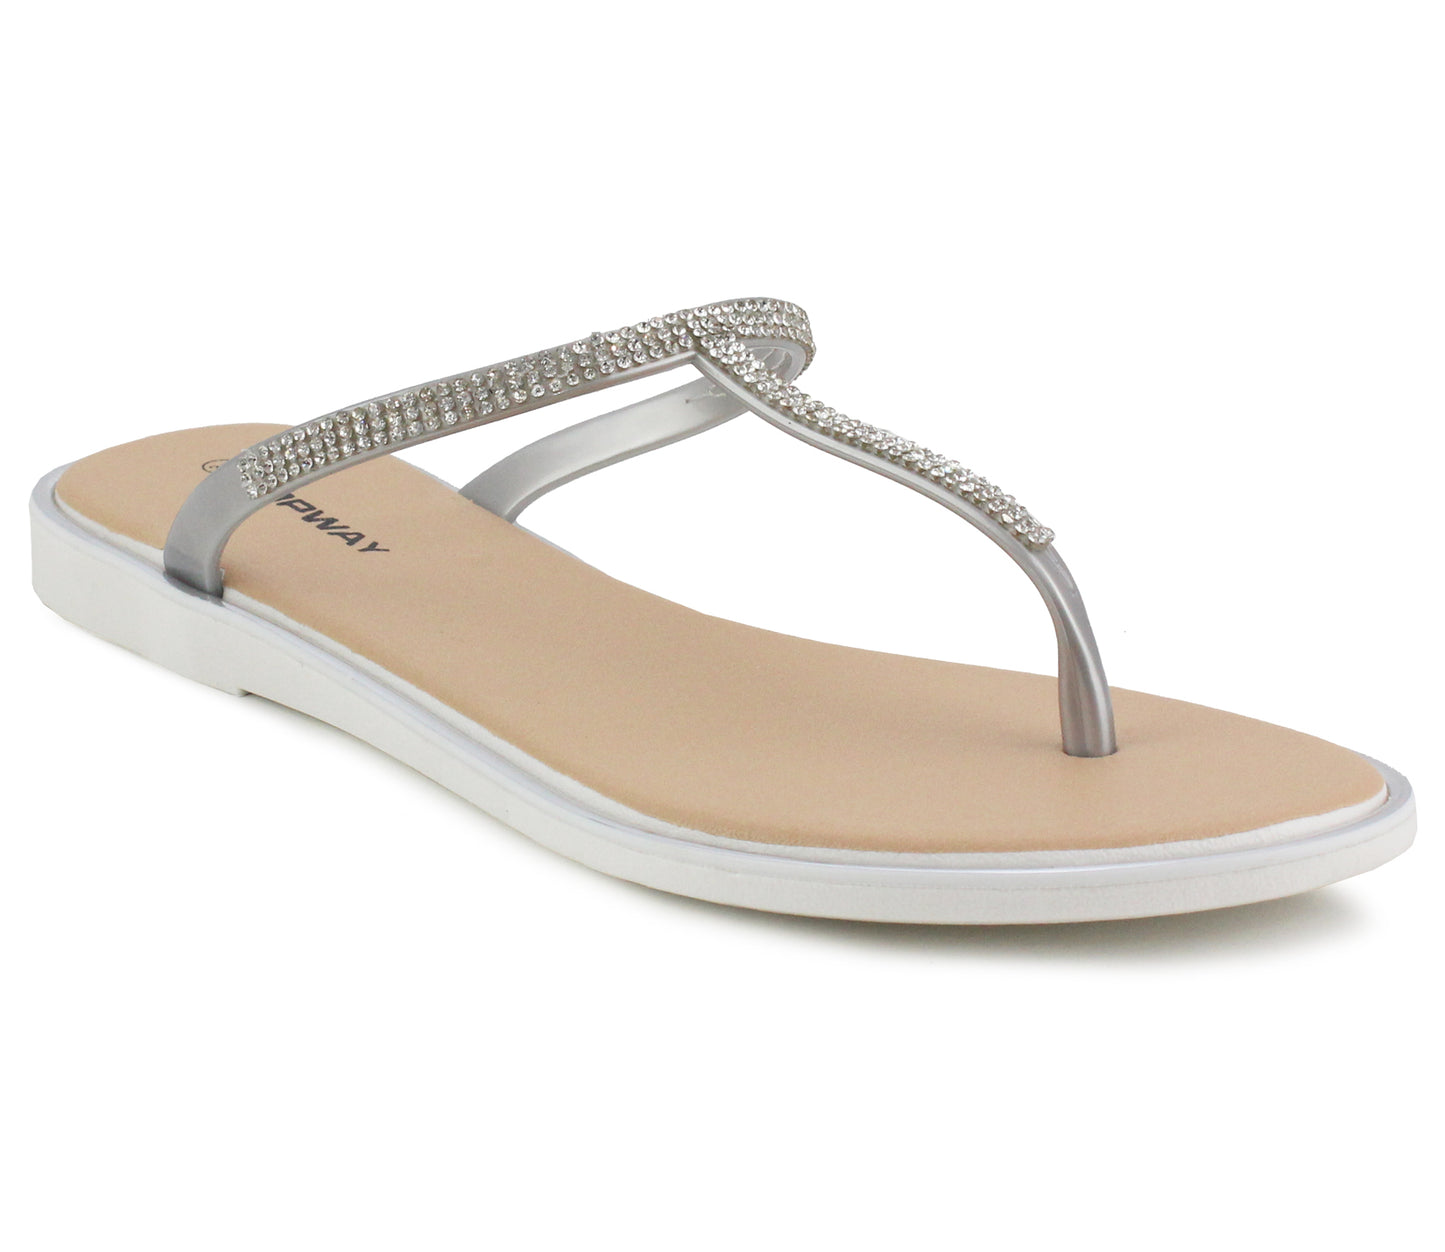 B804050 Womens Toe Post Sandals in Silver